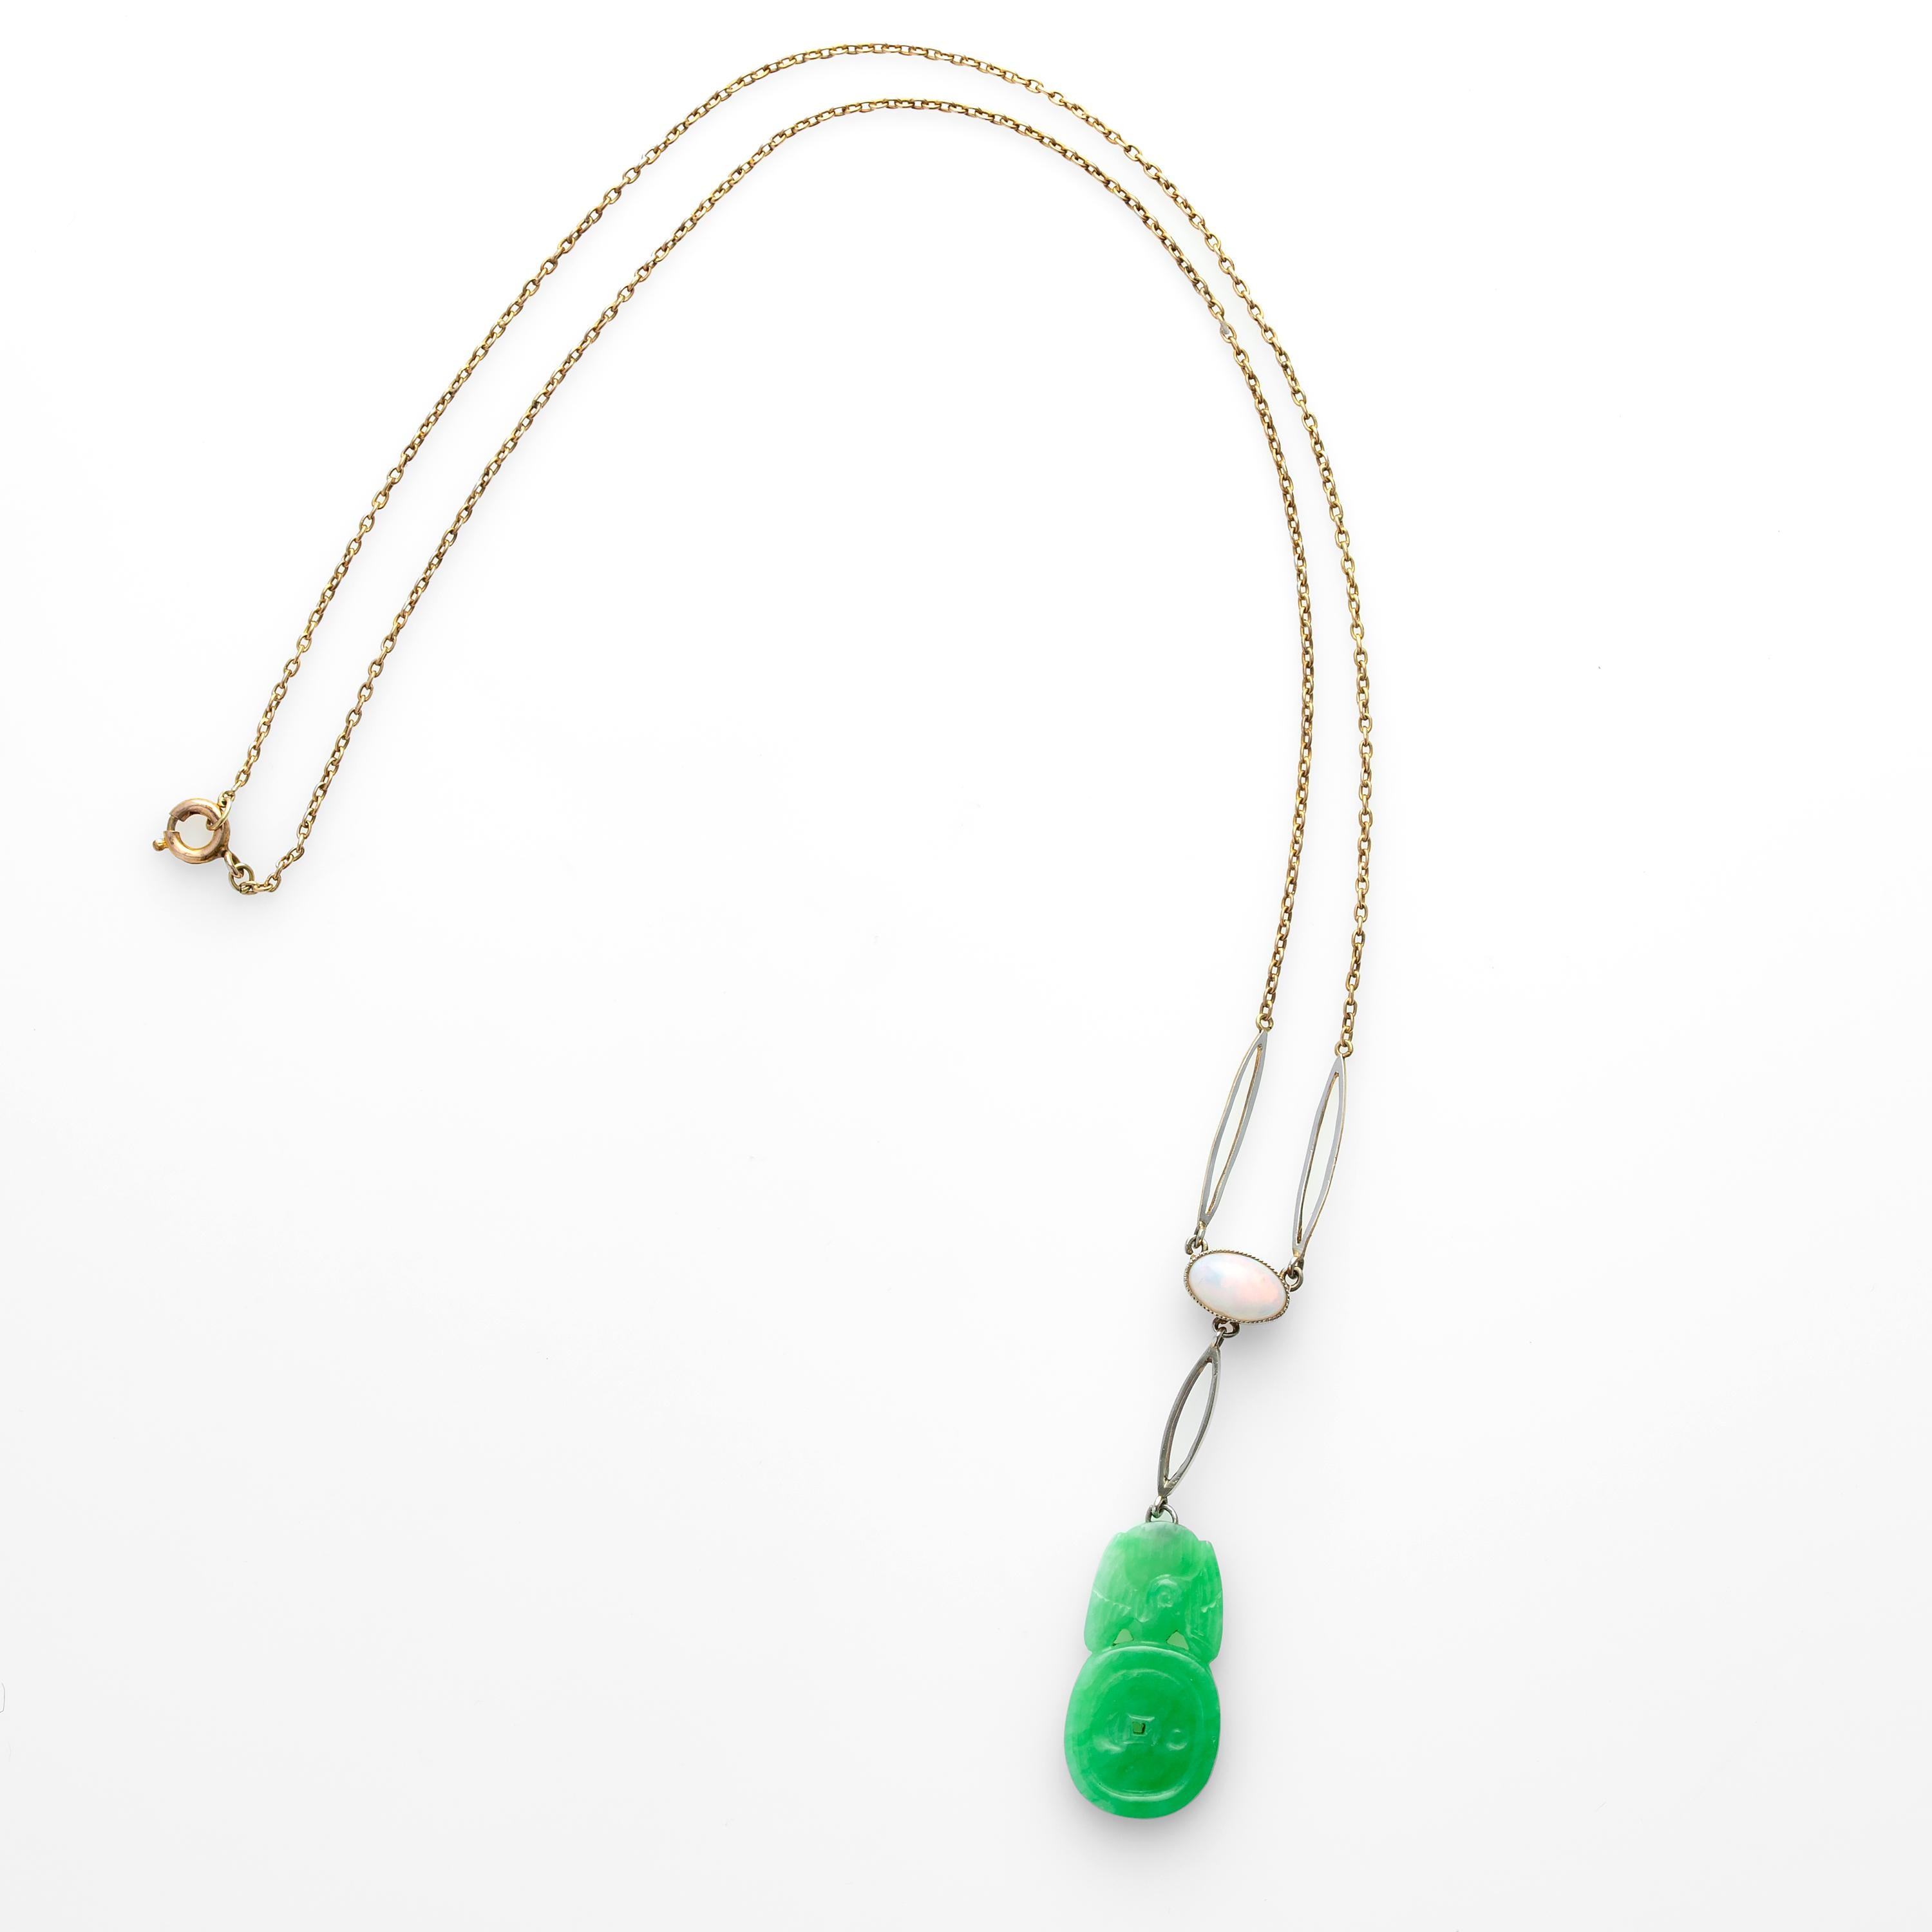 This light, bright, and unusual Edwardian-era necklace features a natural, firey Australian opal from which is suspended a certified natural and untreated jadeite jade carving of a bat perched atop a coin; a visual pun based on the pronunciation of